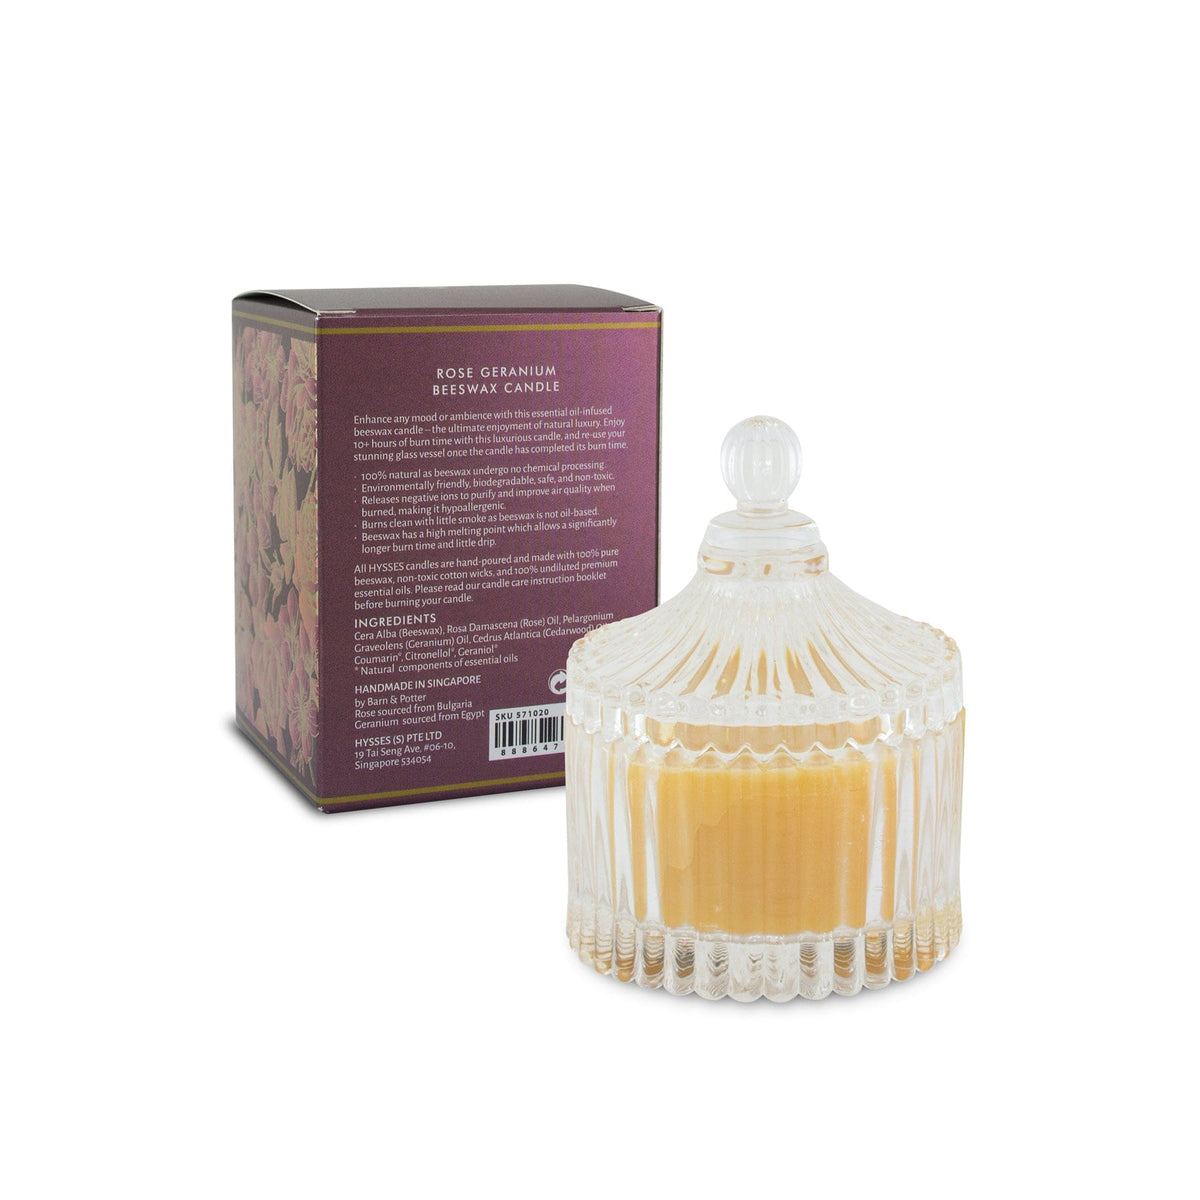 Hysses Home Scents Beeswax Candle Rose Geranium